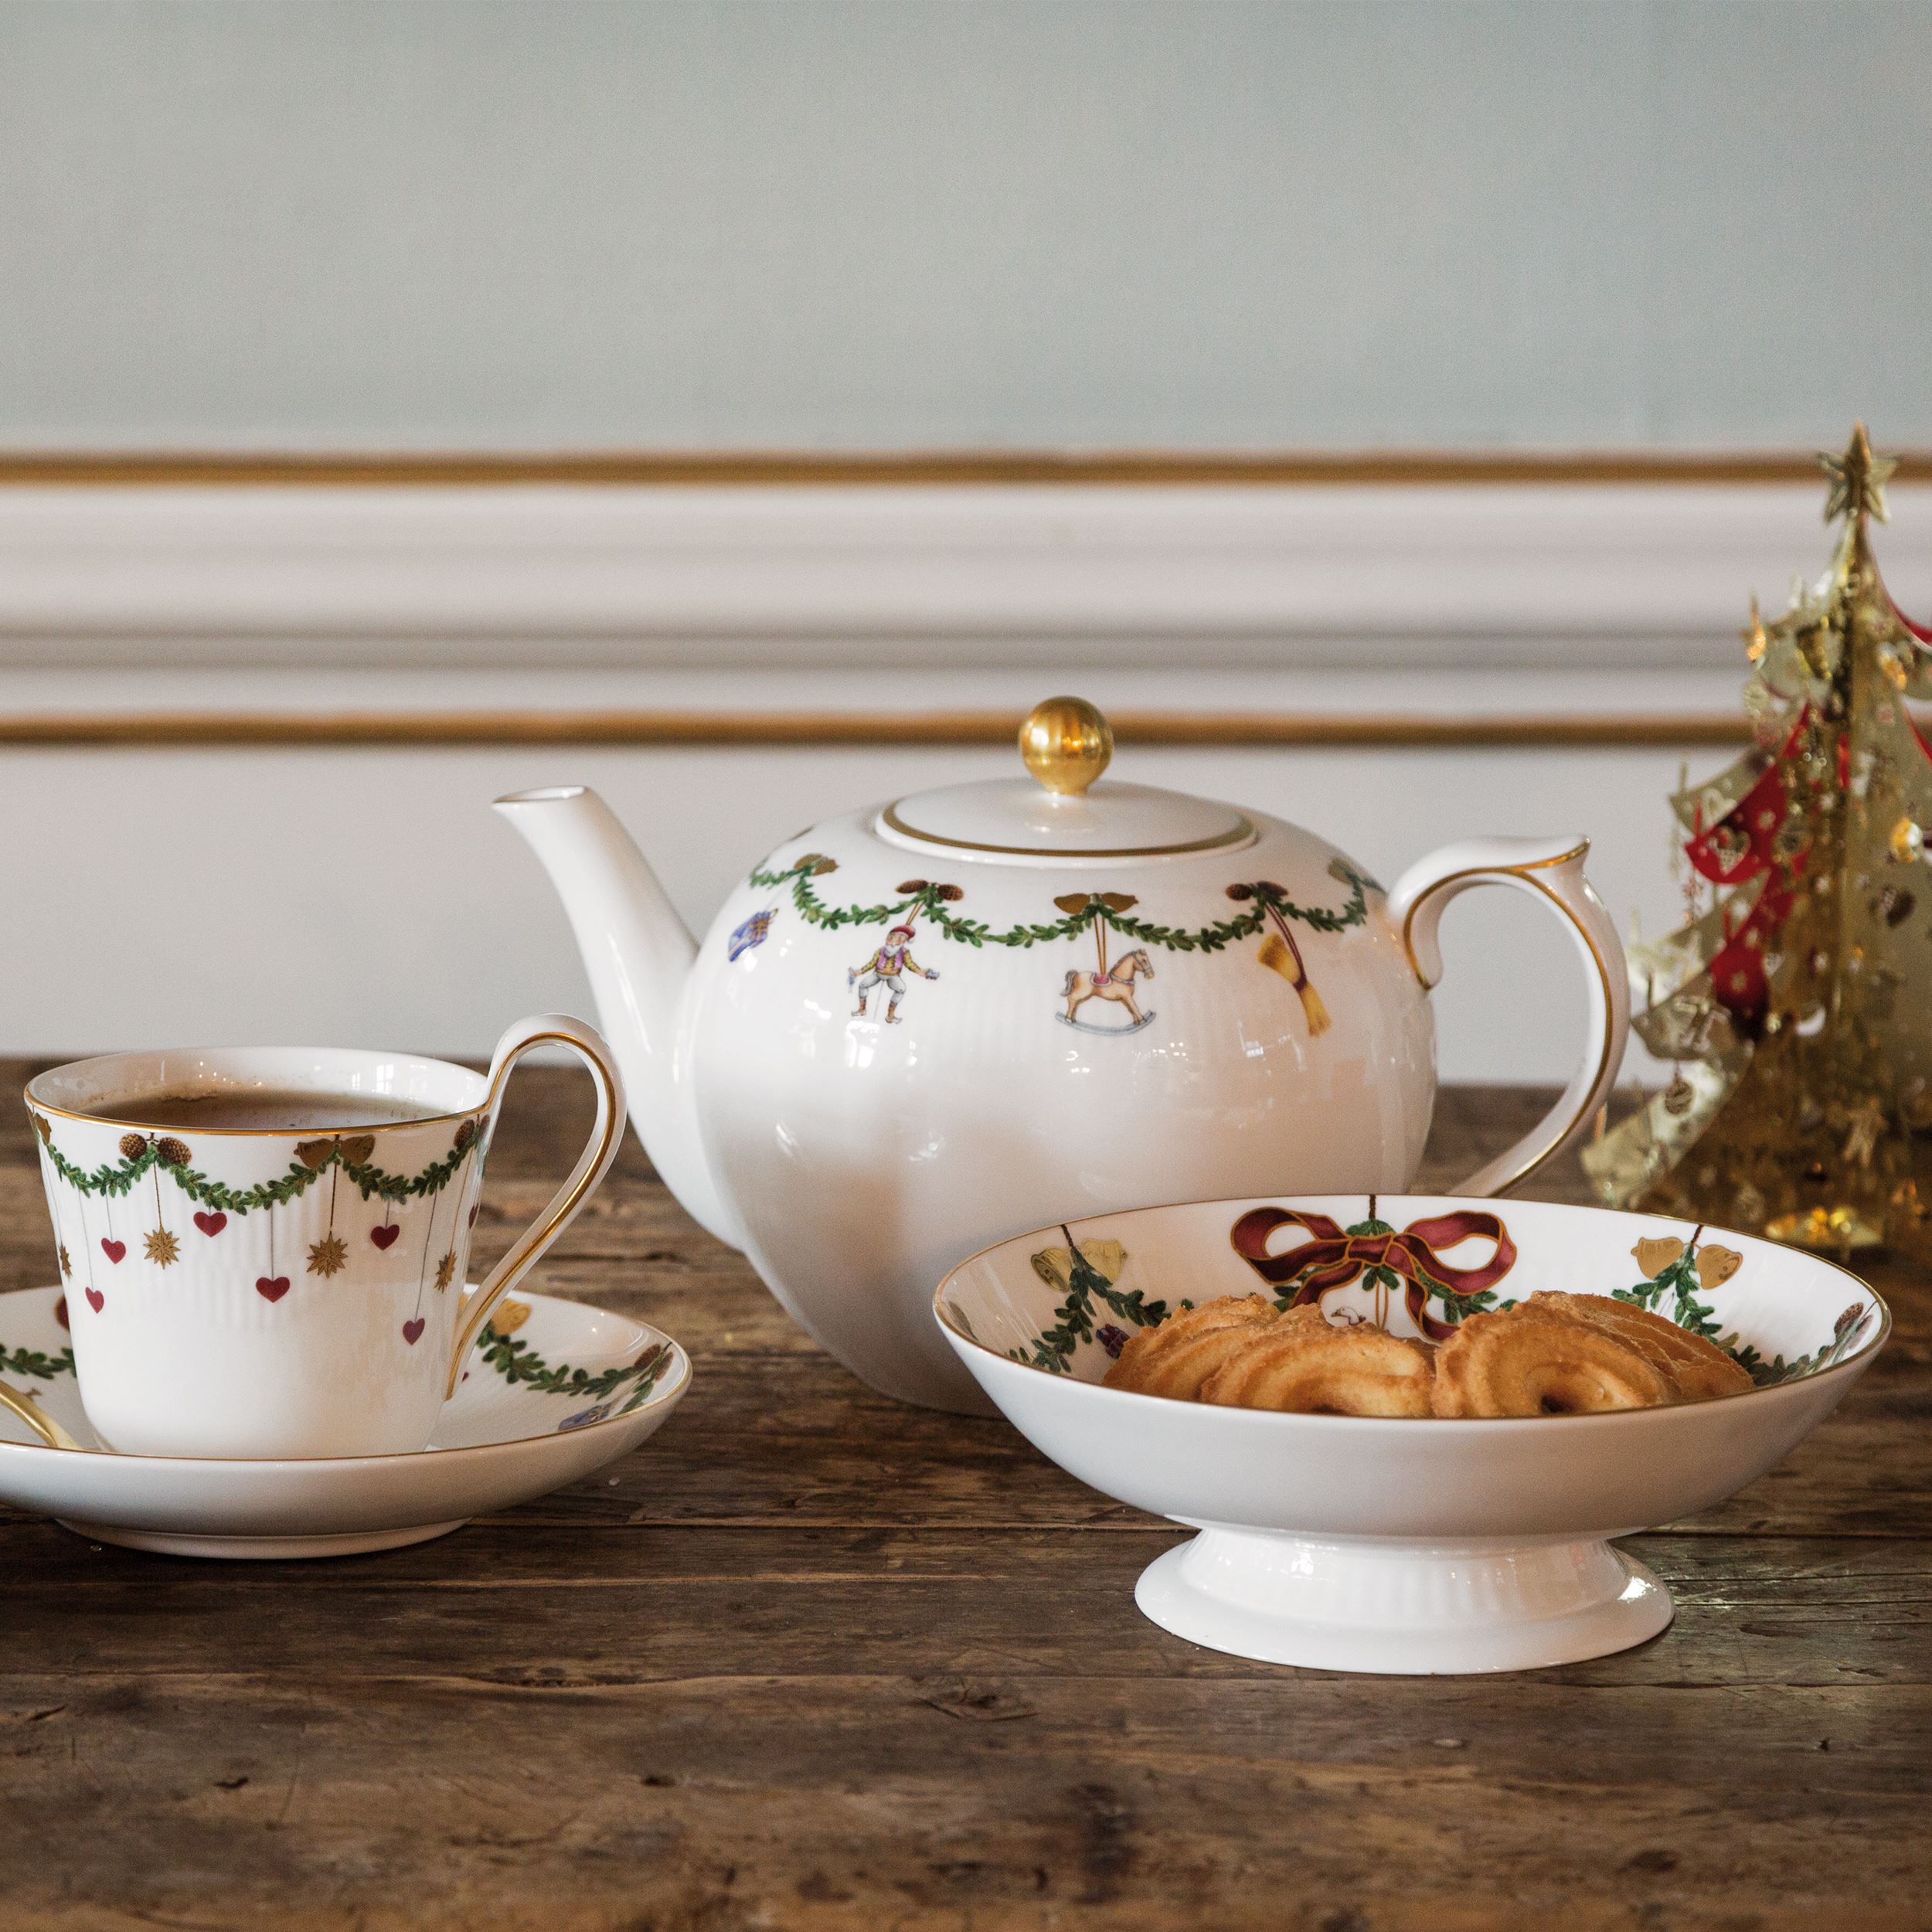 STAR Flutedクリスマス高ハンドルCup and Saucer byロイヤル